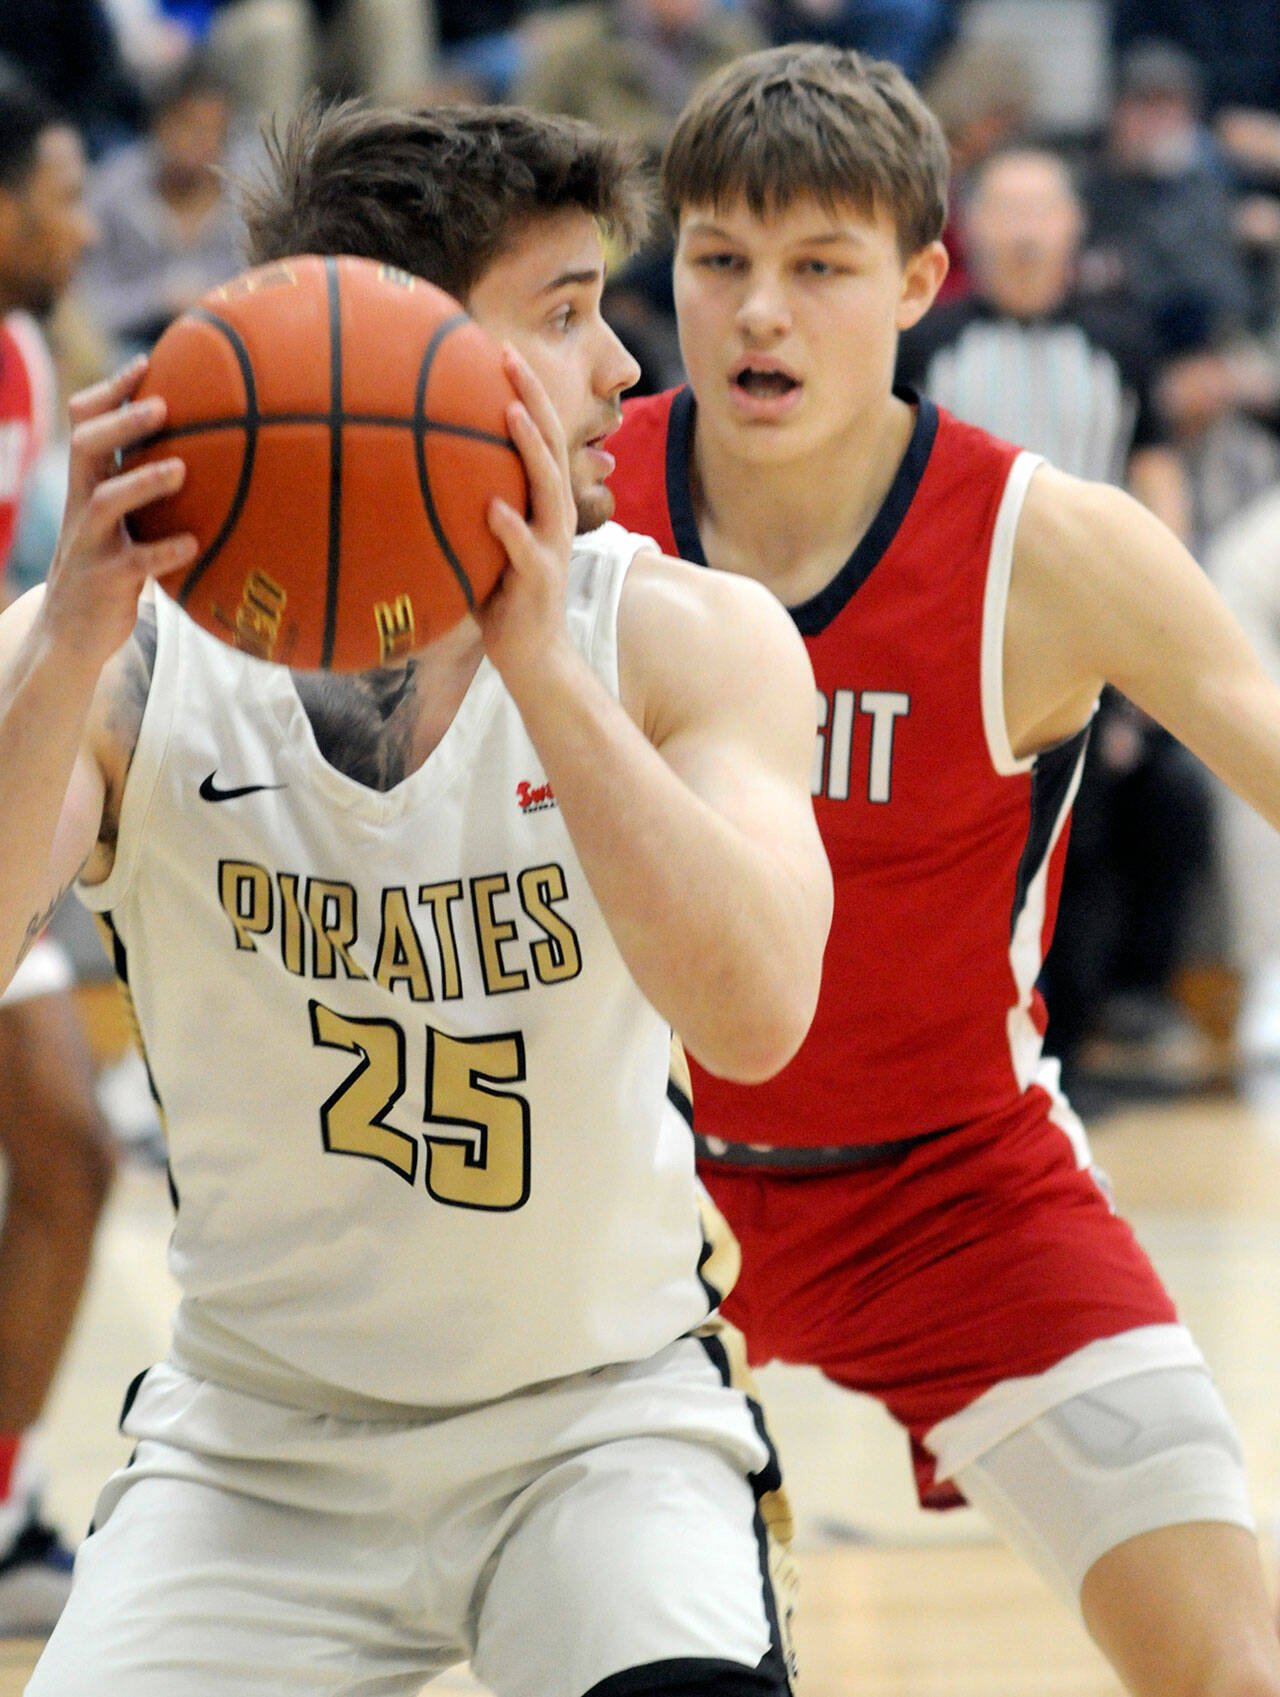 KEITH THORPE/PENINSULA DAILY NEWS
Peninsula's Max D'Amato, front, looks past the defense of Skagit Valley's Jacob Bilodeau on Wednesday night in Port Angeles.